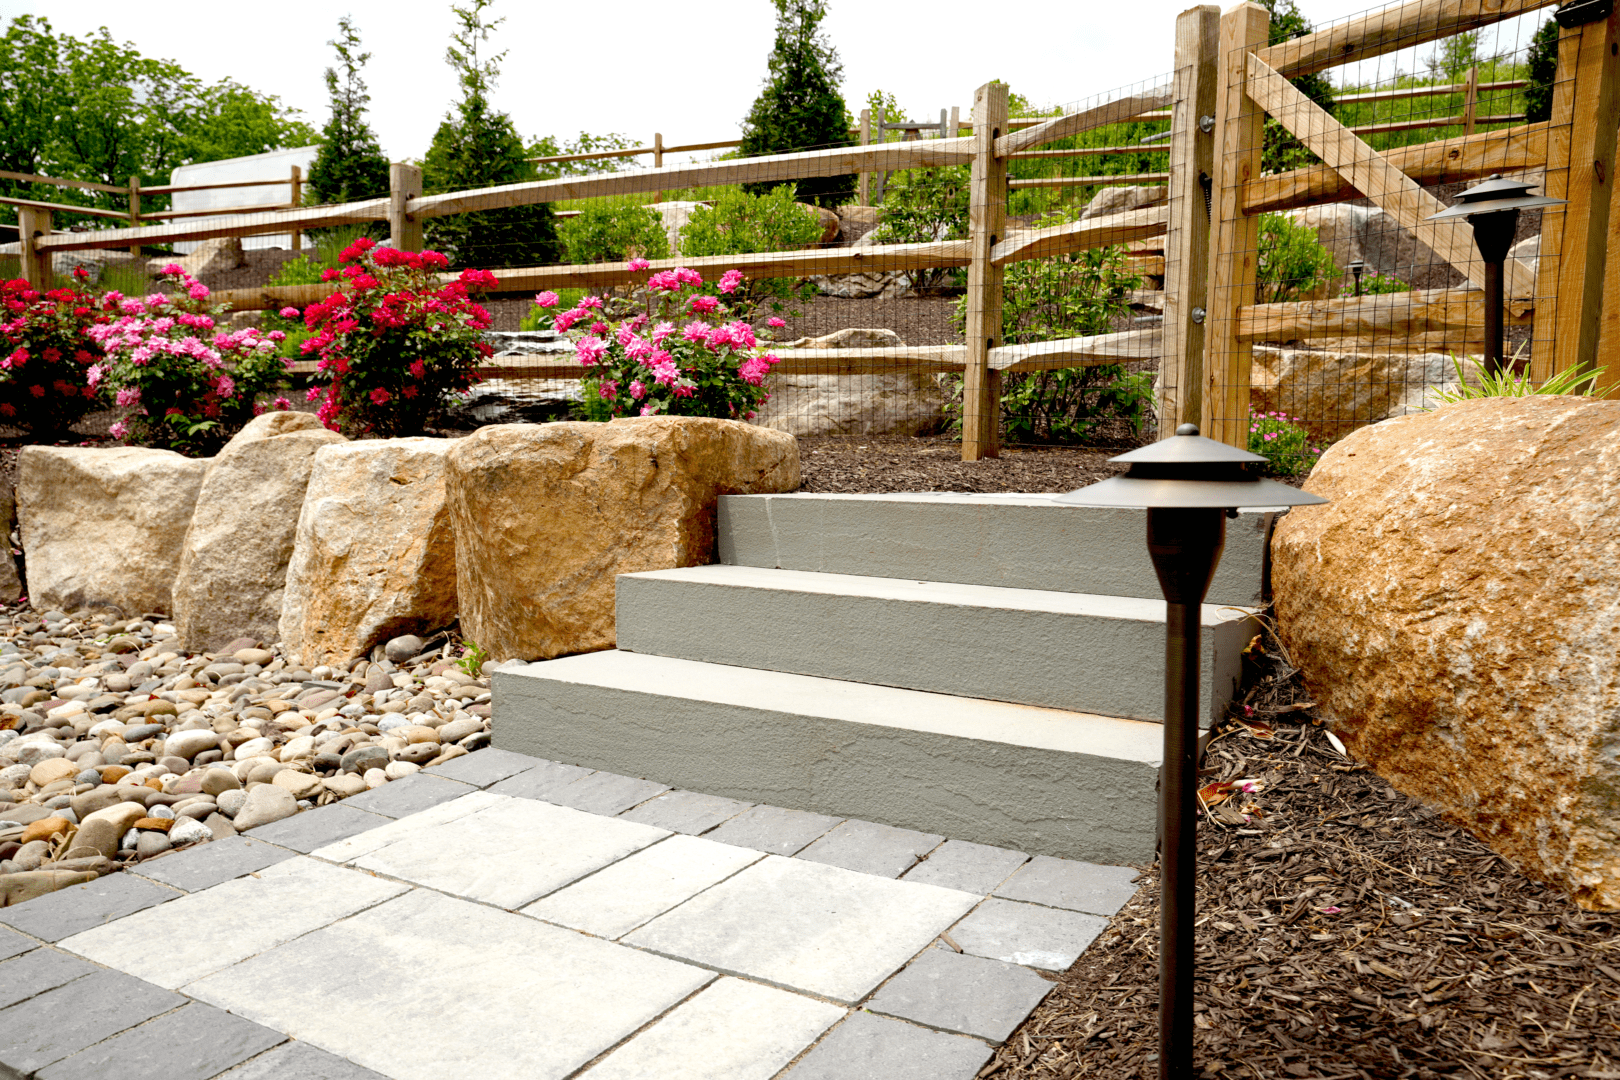 A hardscape design featuring a stone path leading to a serene rock garden.